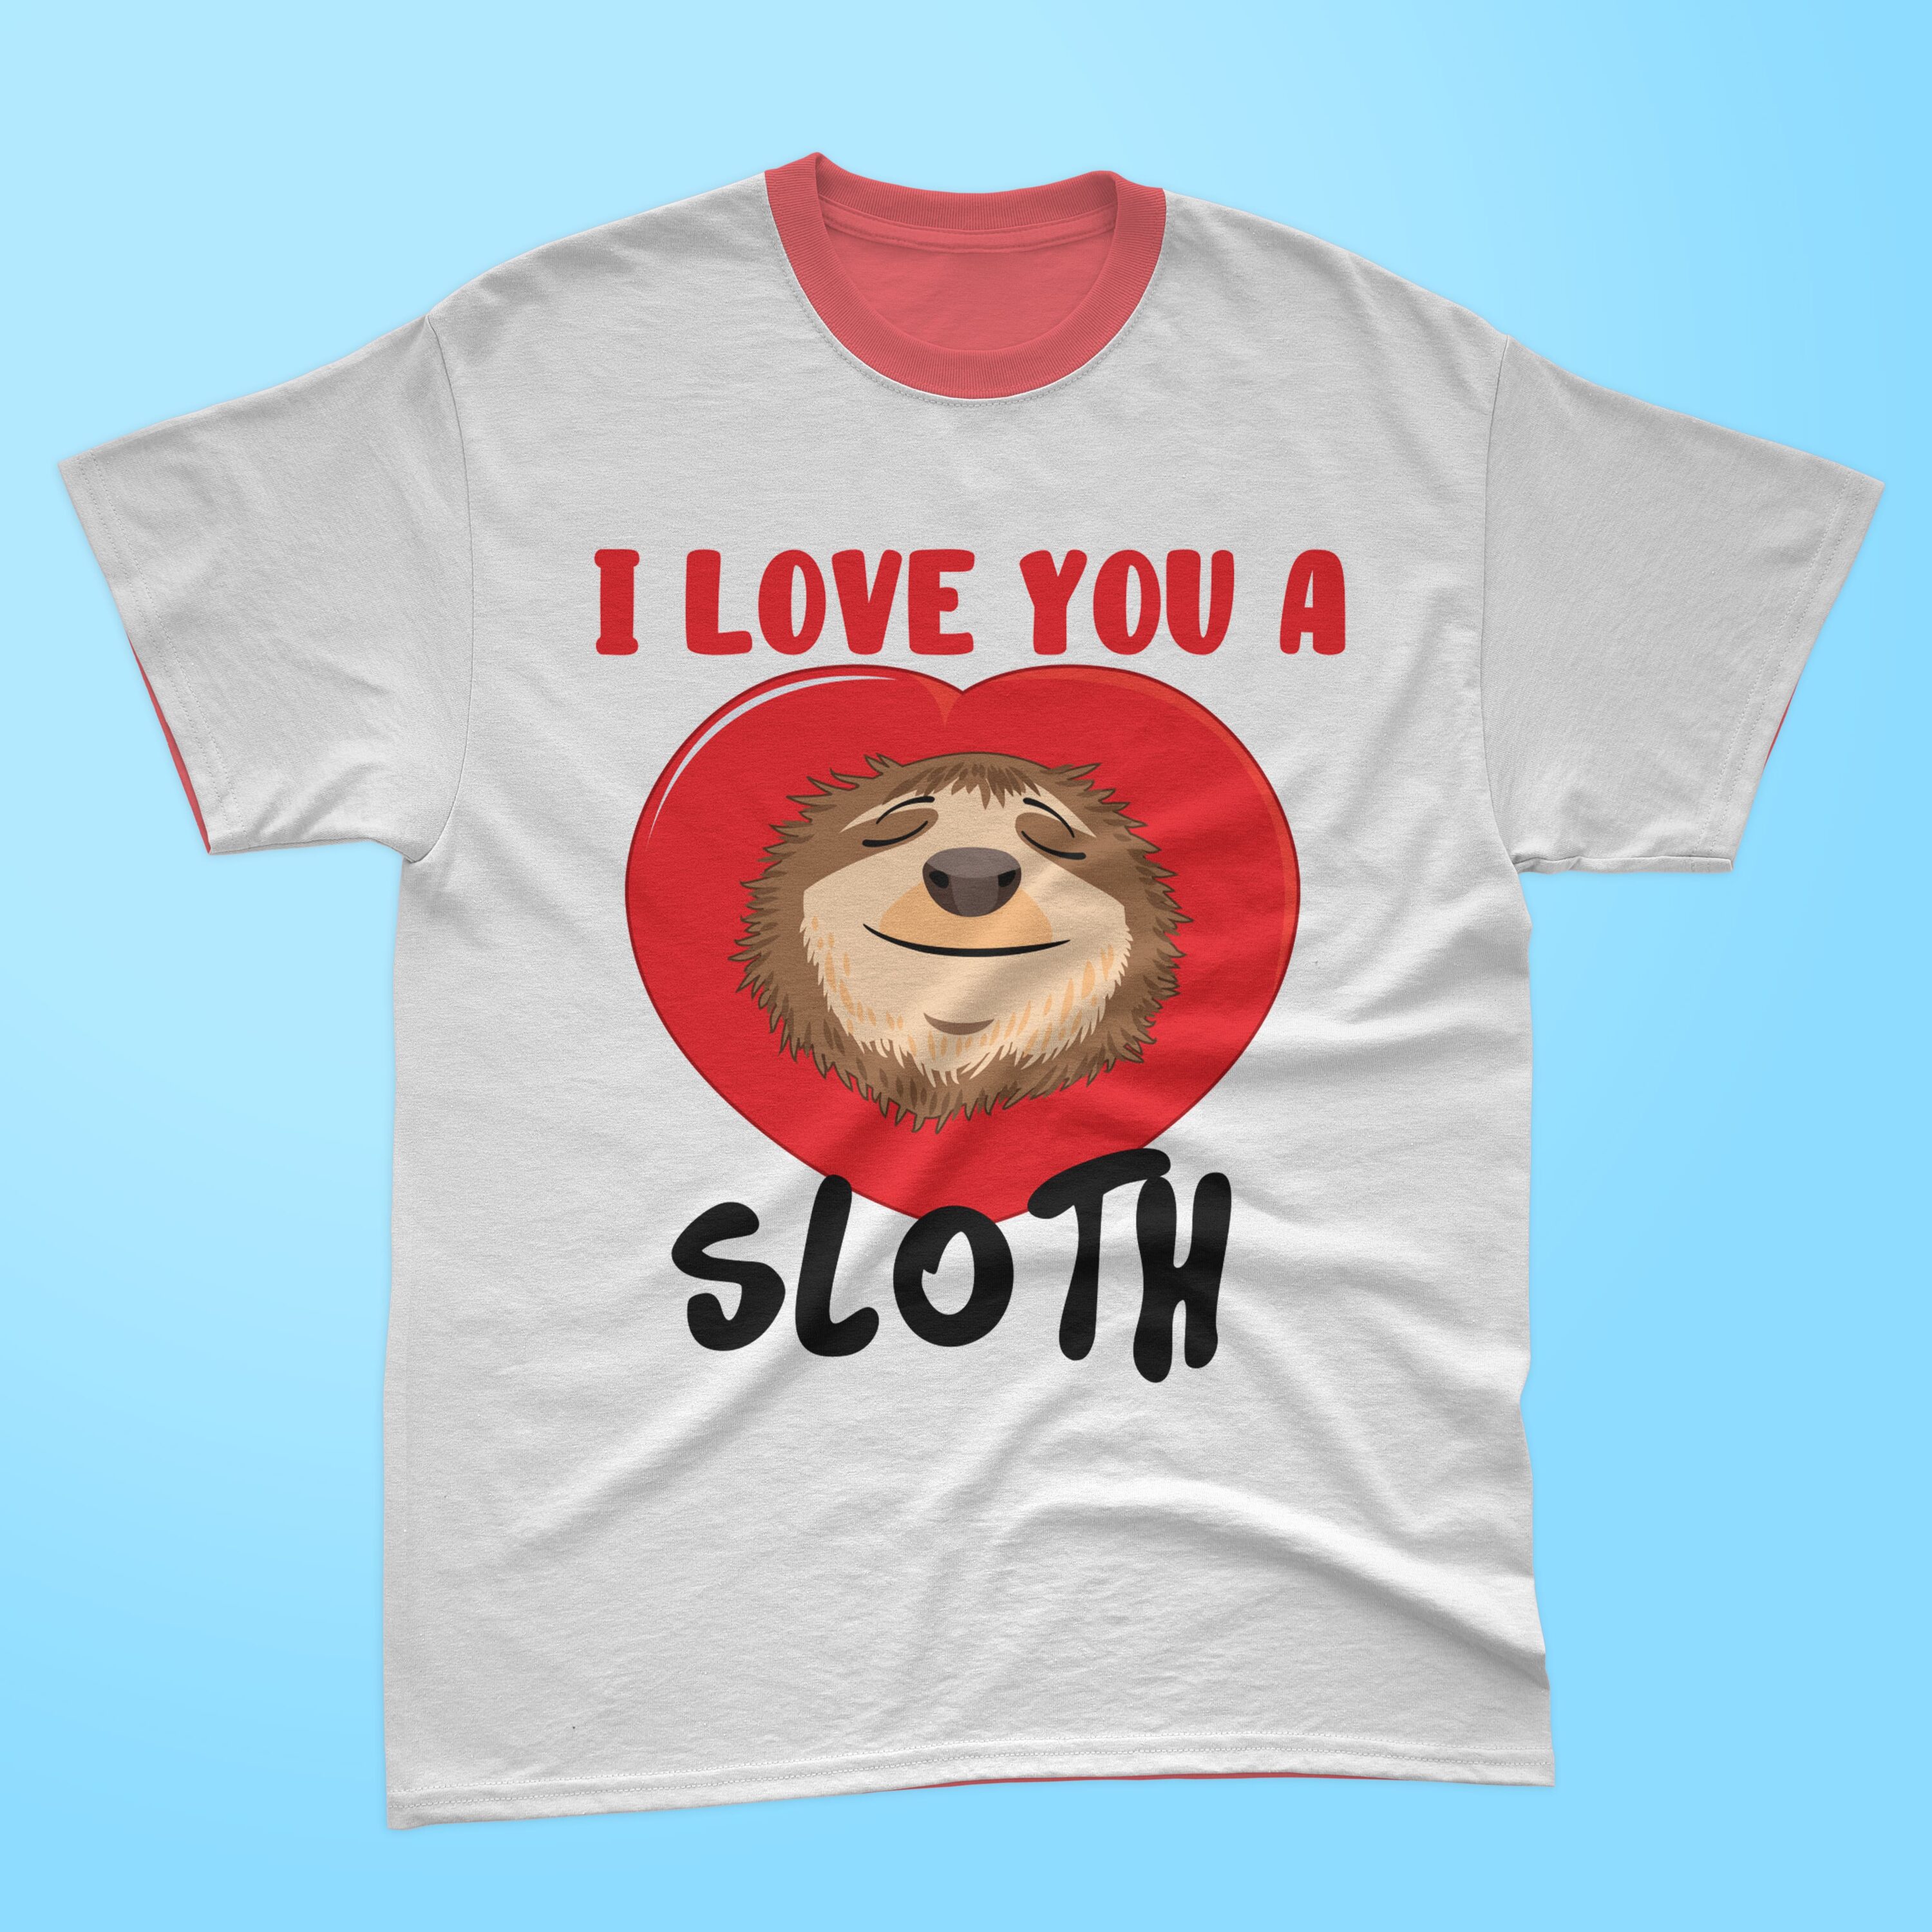 Image of white t-shirt with irresistible sloth print and "I love you" slogan.